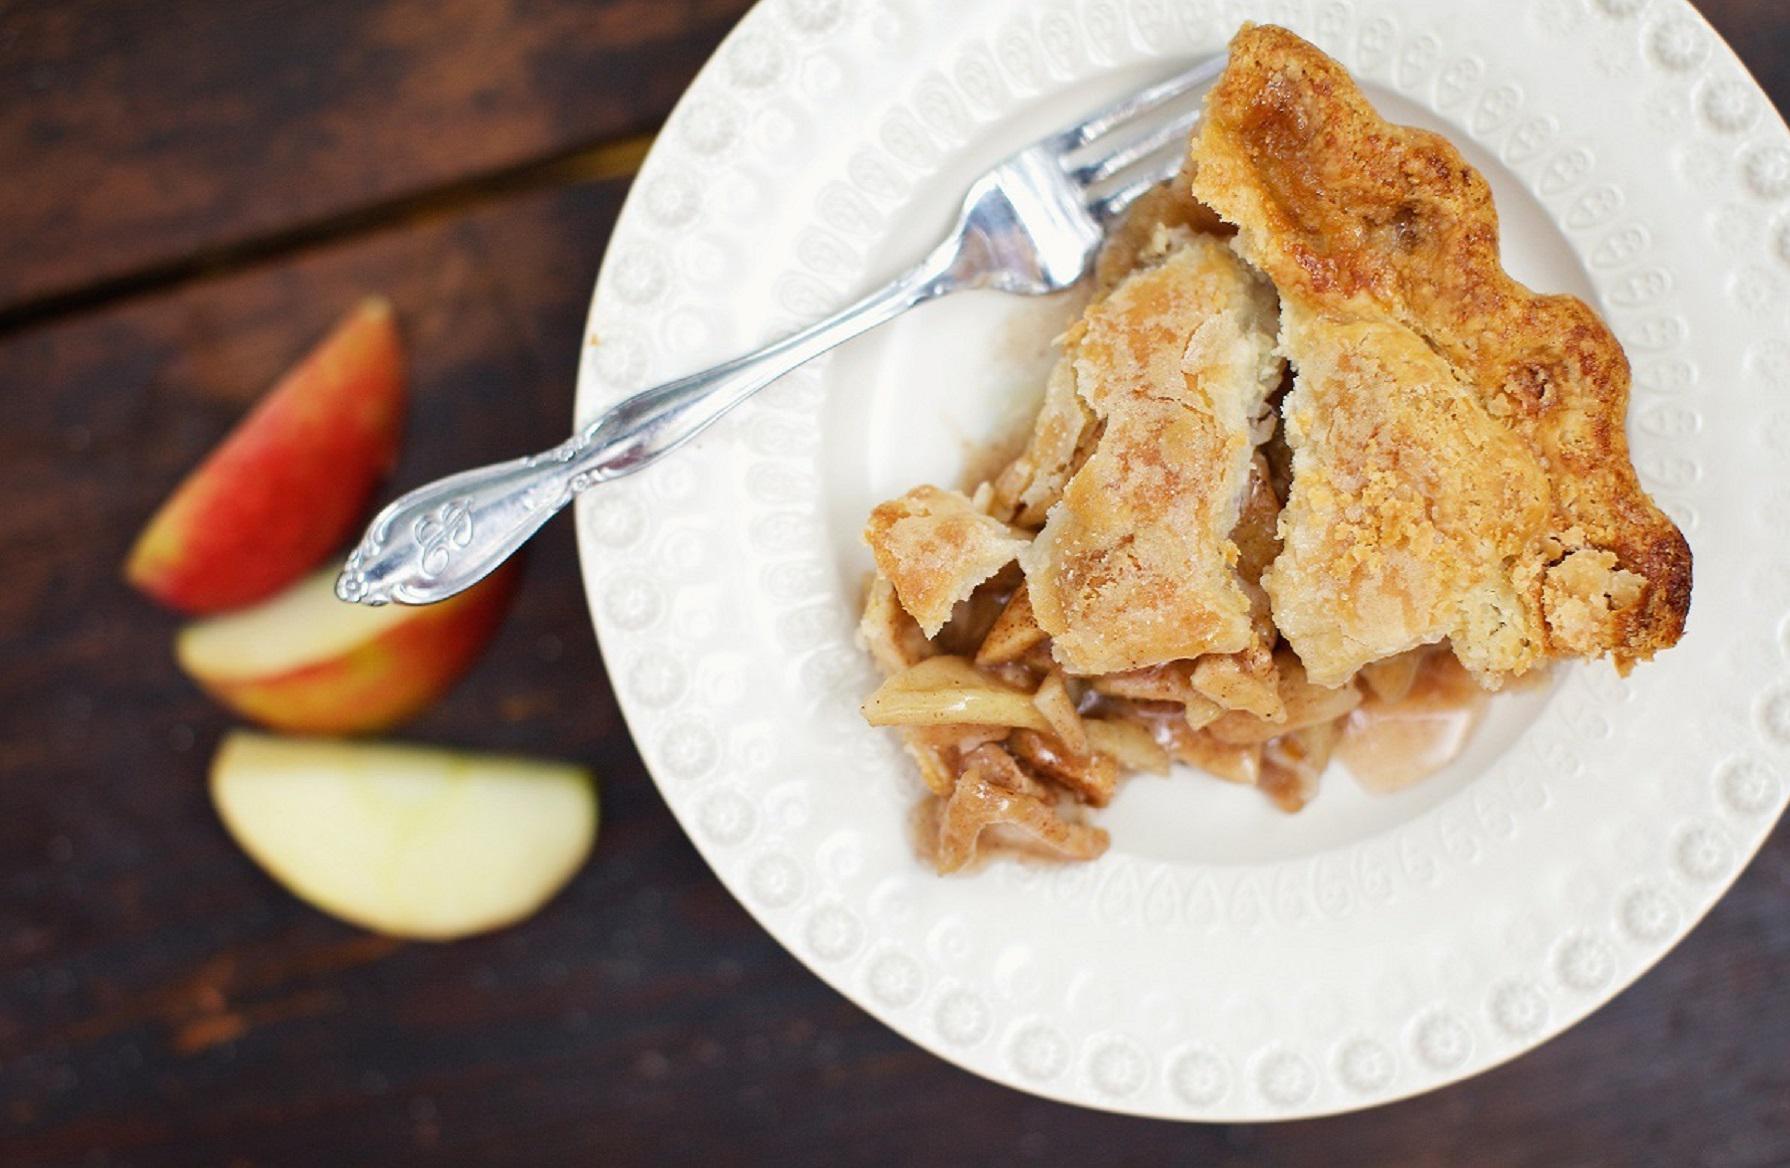 Where to Find Americaâs Best Apple Pies